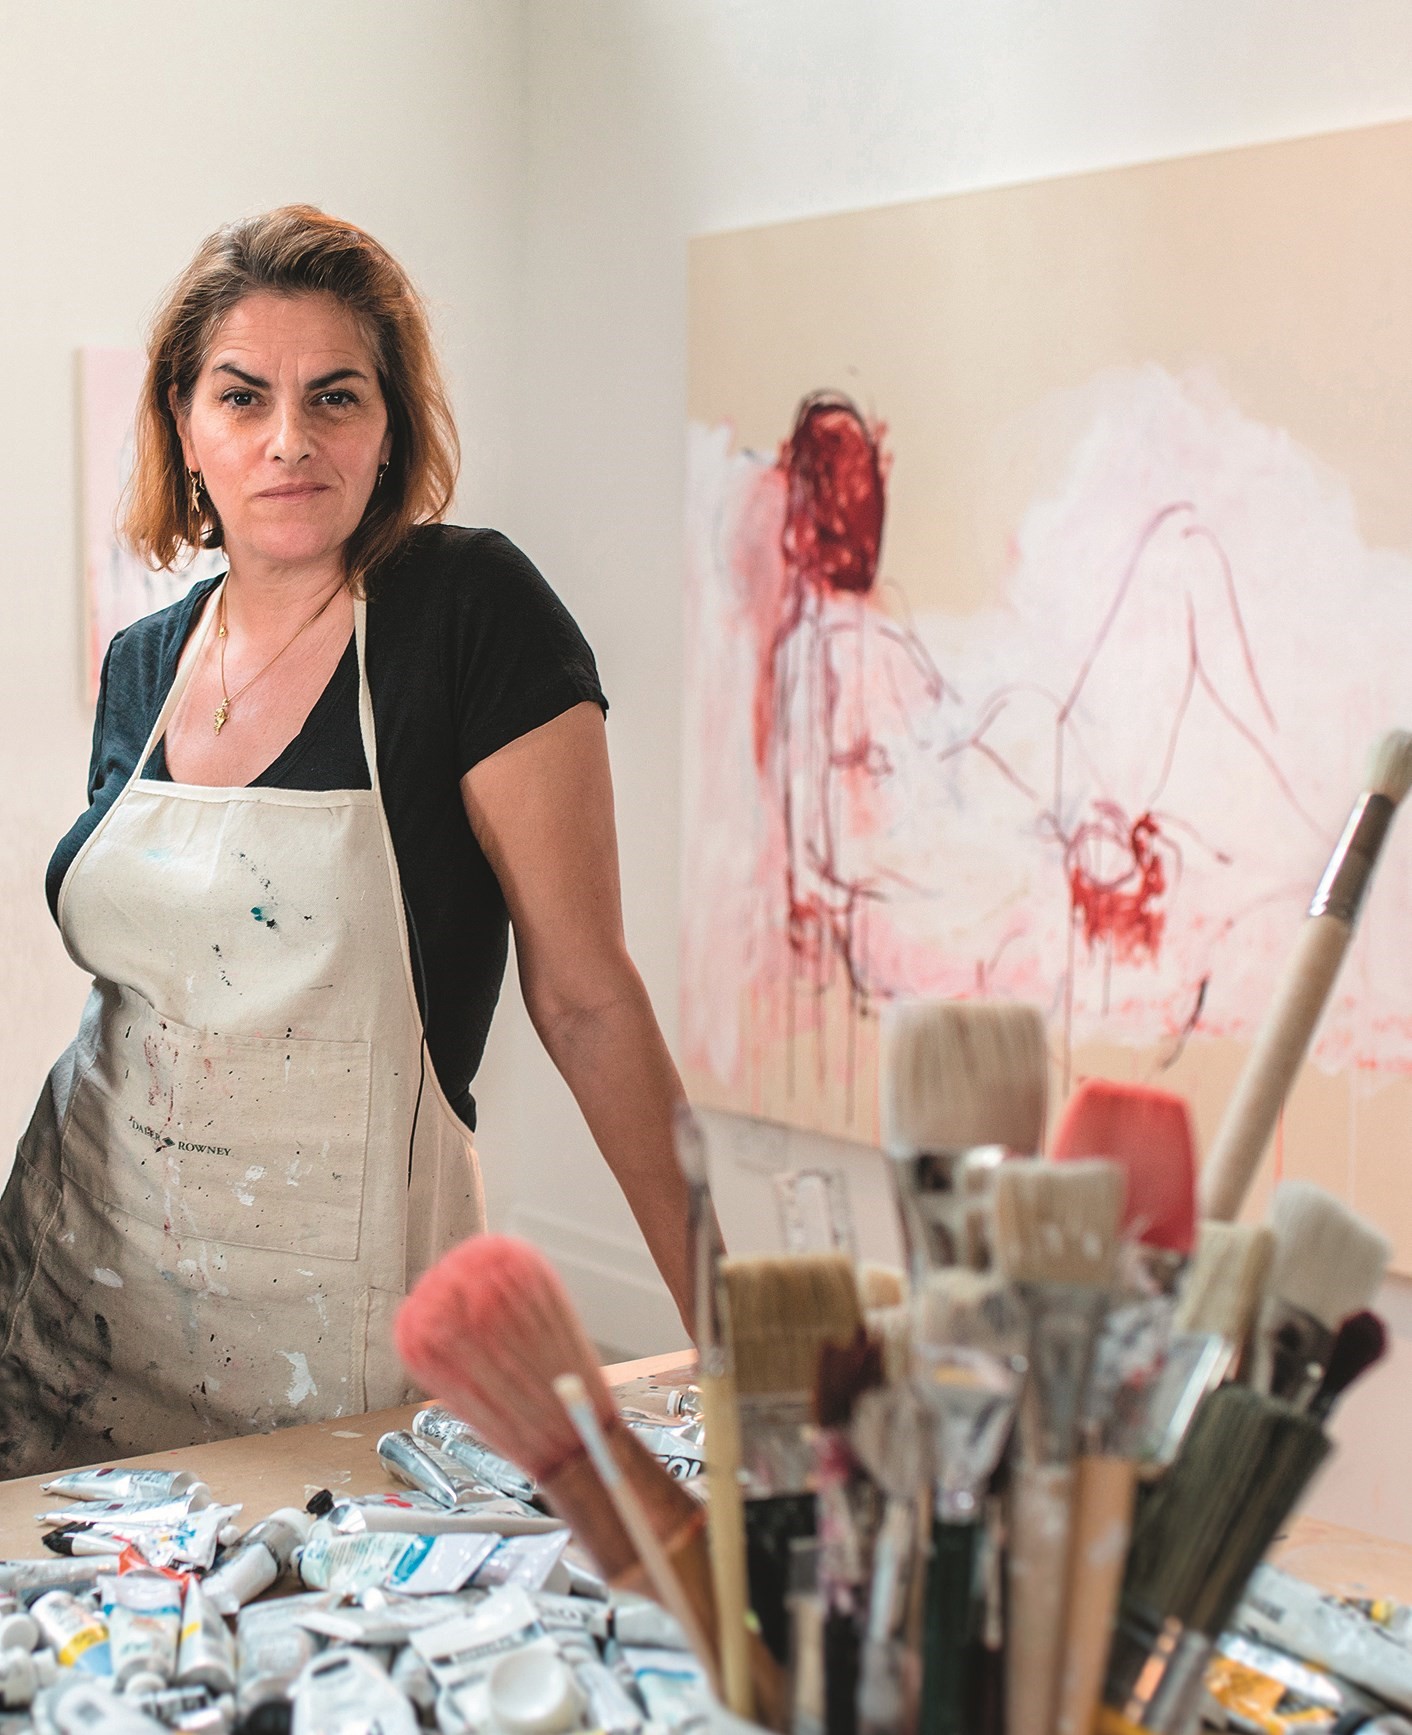 Tracey Emin Has Never Been So Happy Following Dramatic Cancer Surgery Dazed